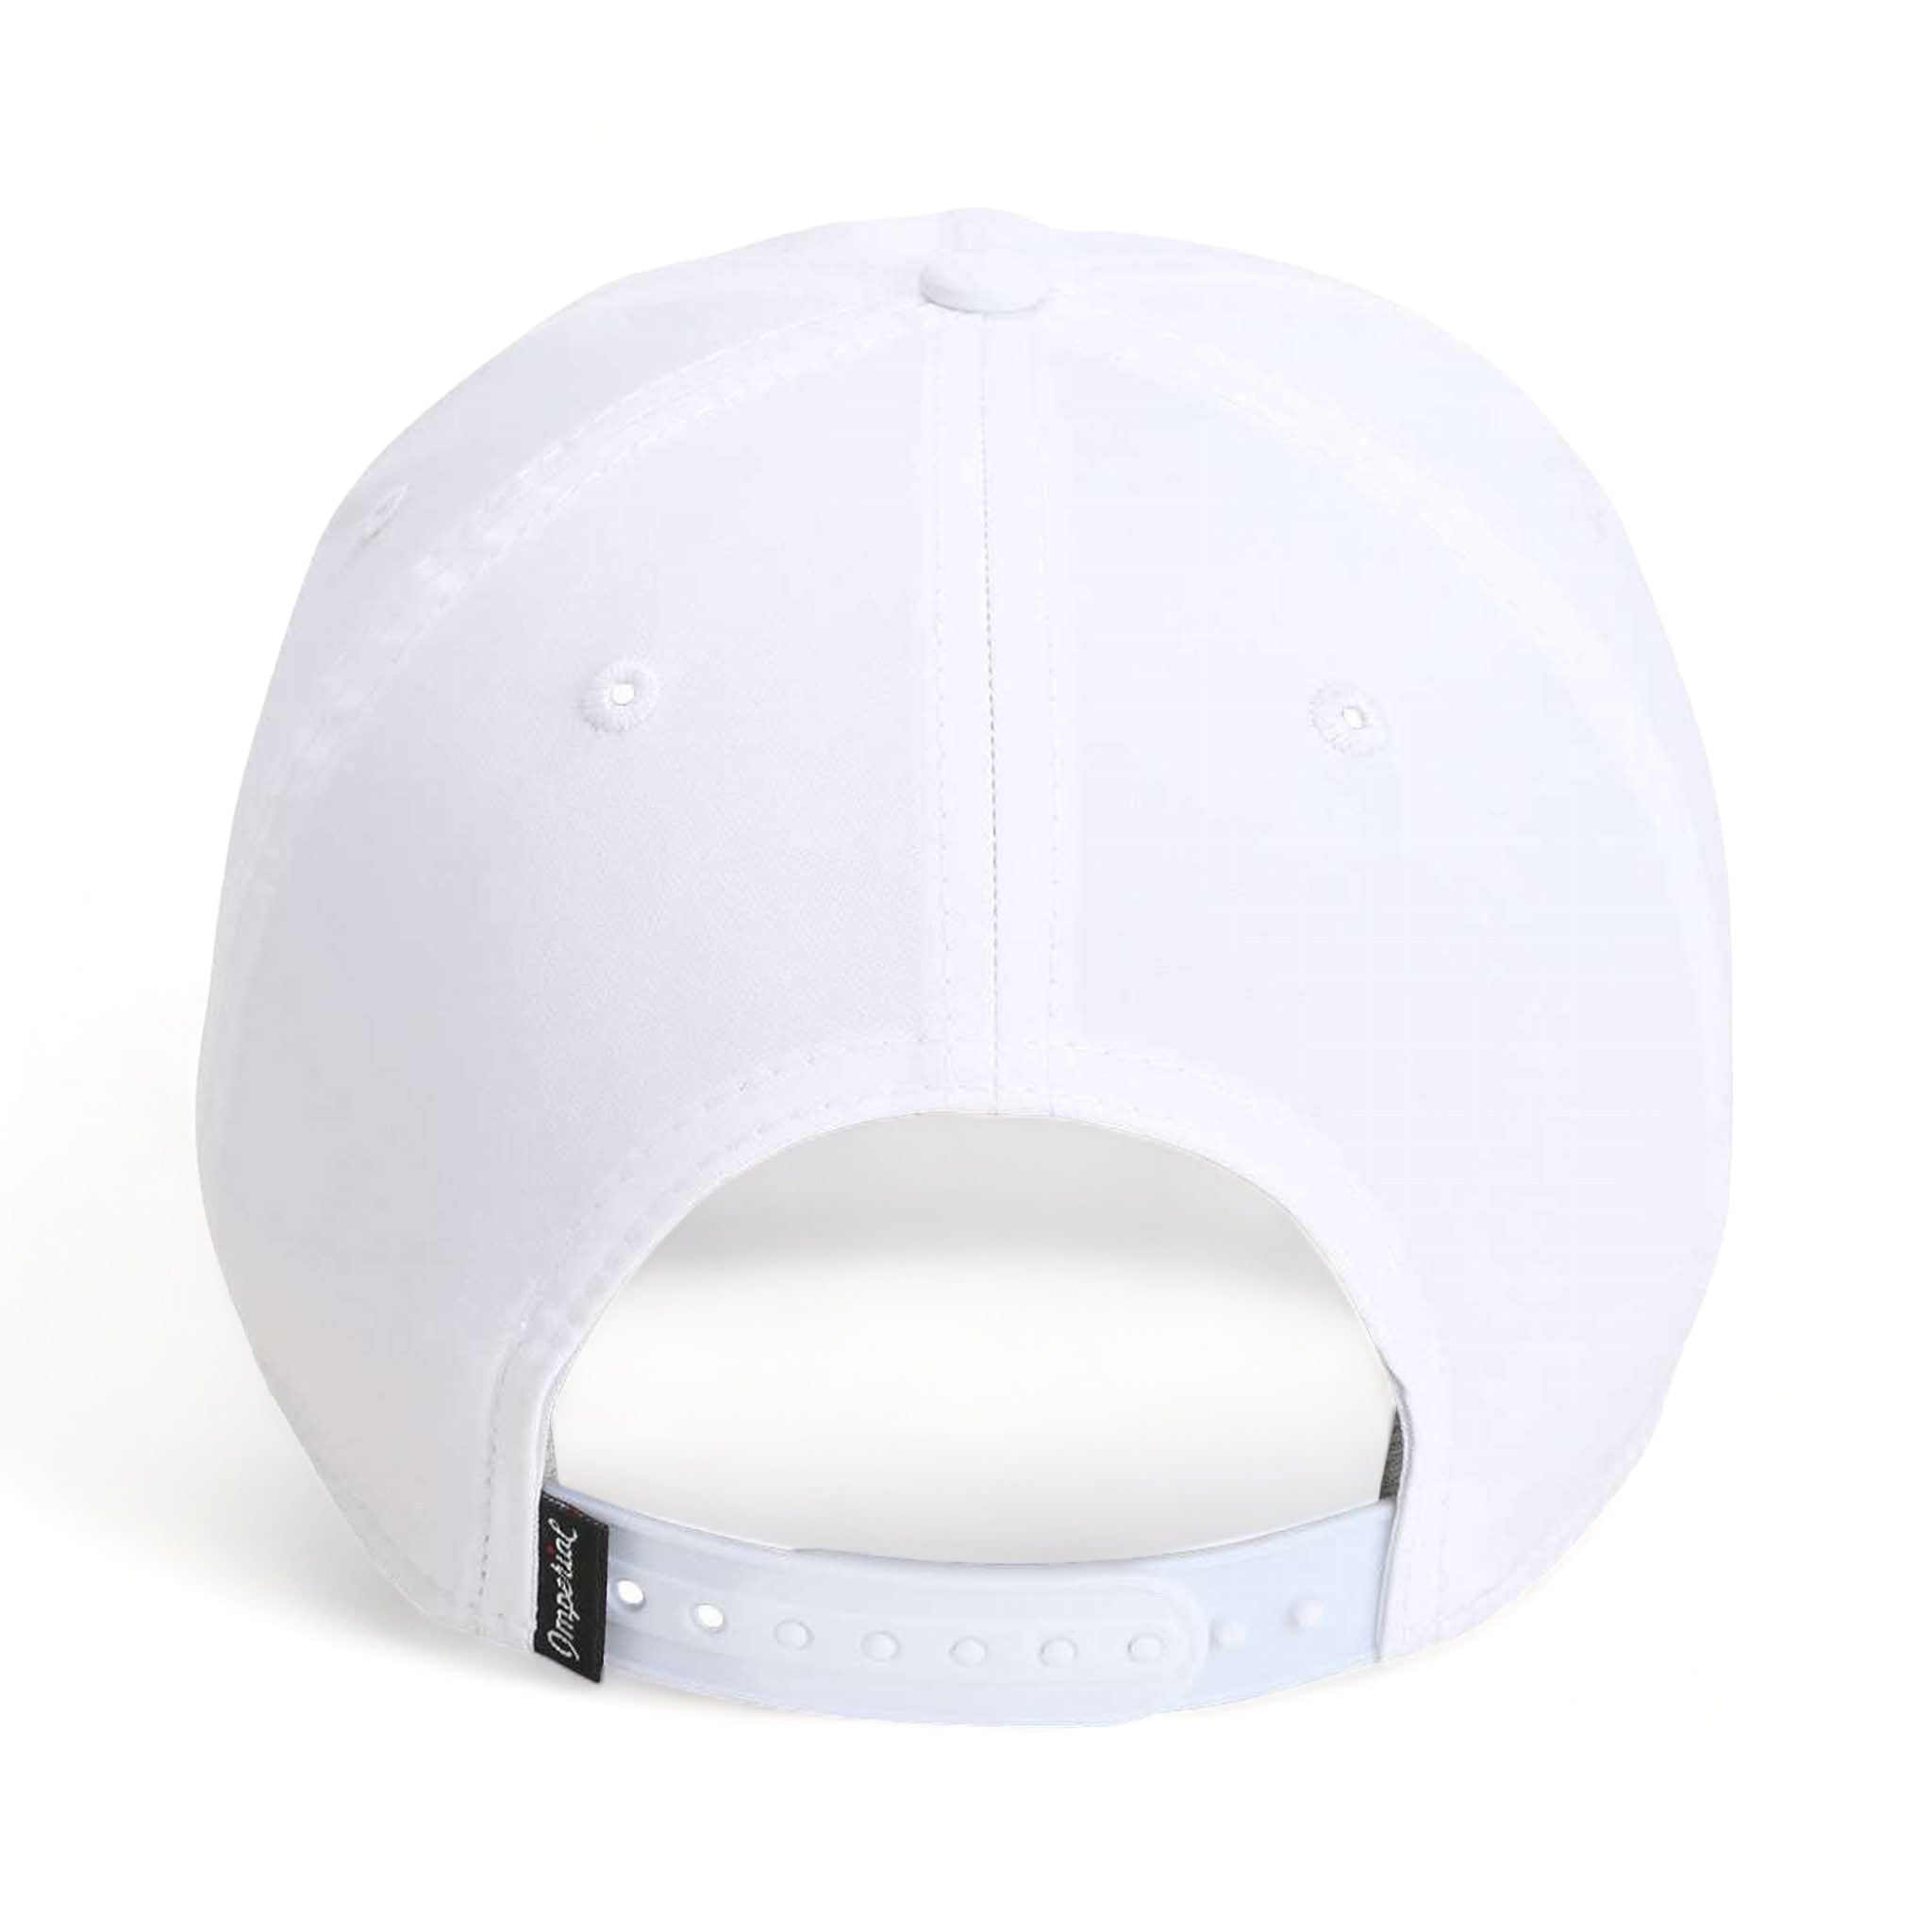 Back view of Imperial 5054 custom hat in white and red-black